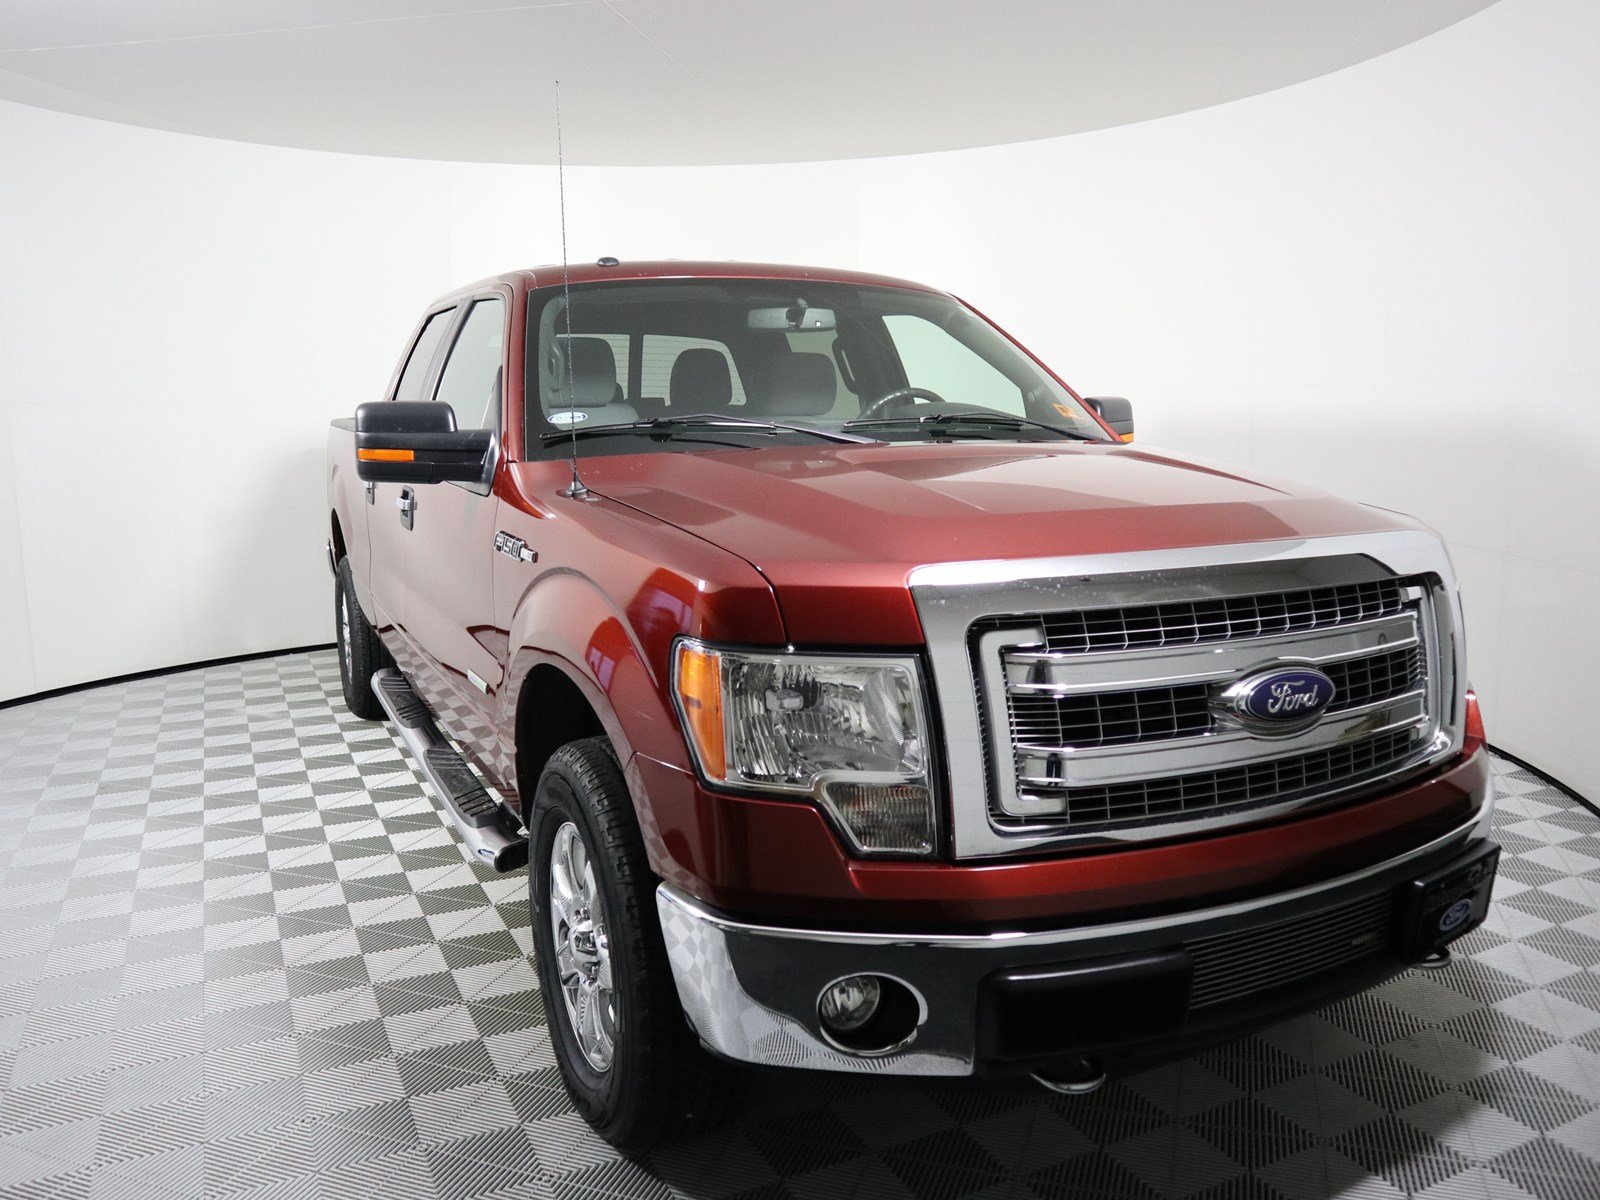 Certified Pre-Owned 2014 Ford F-150 XLT Crew Cab Pickup in Parkersburg